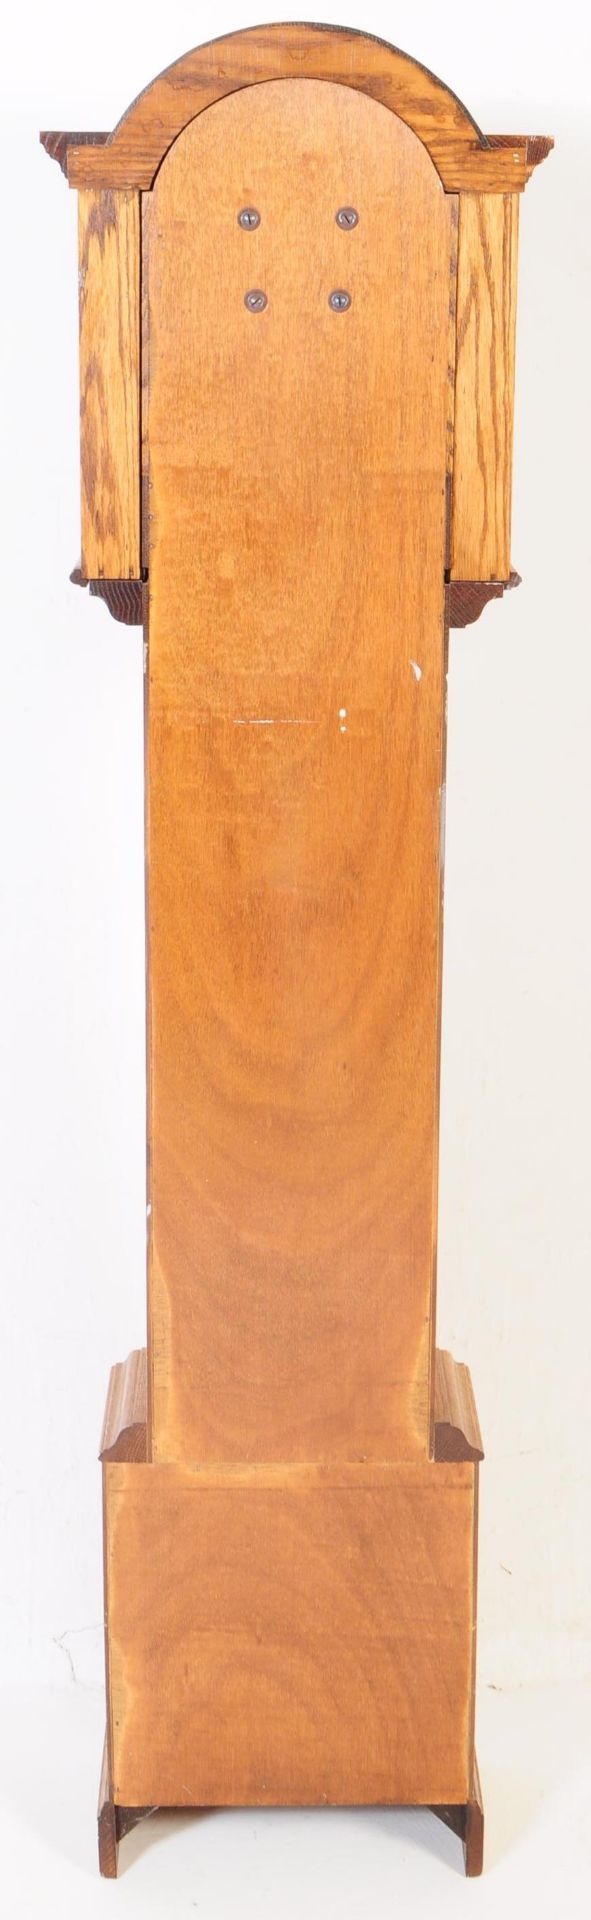 EARLY 20TH CENTURY ARTS & CRAFTS OAK GRANDMOTHER CLOCK - Image 9 of 9